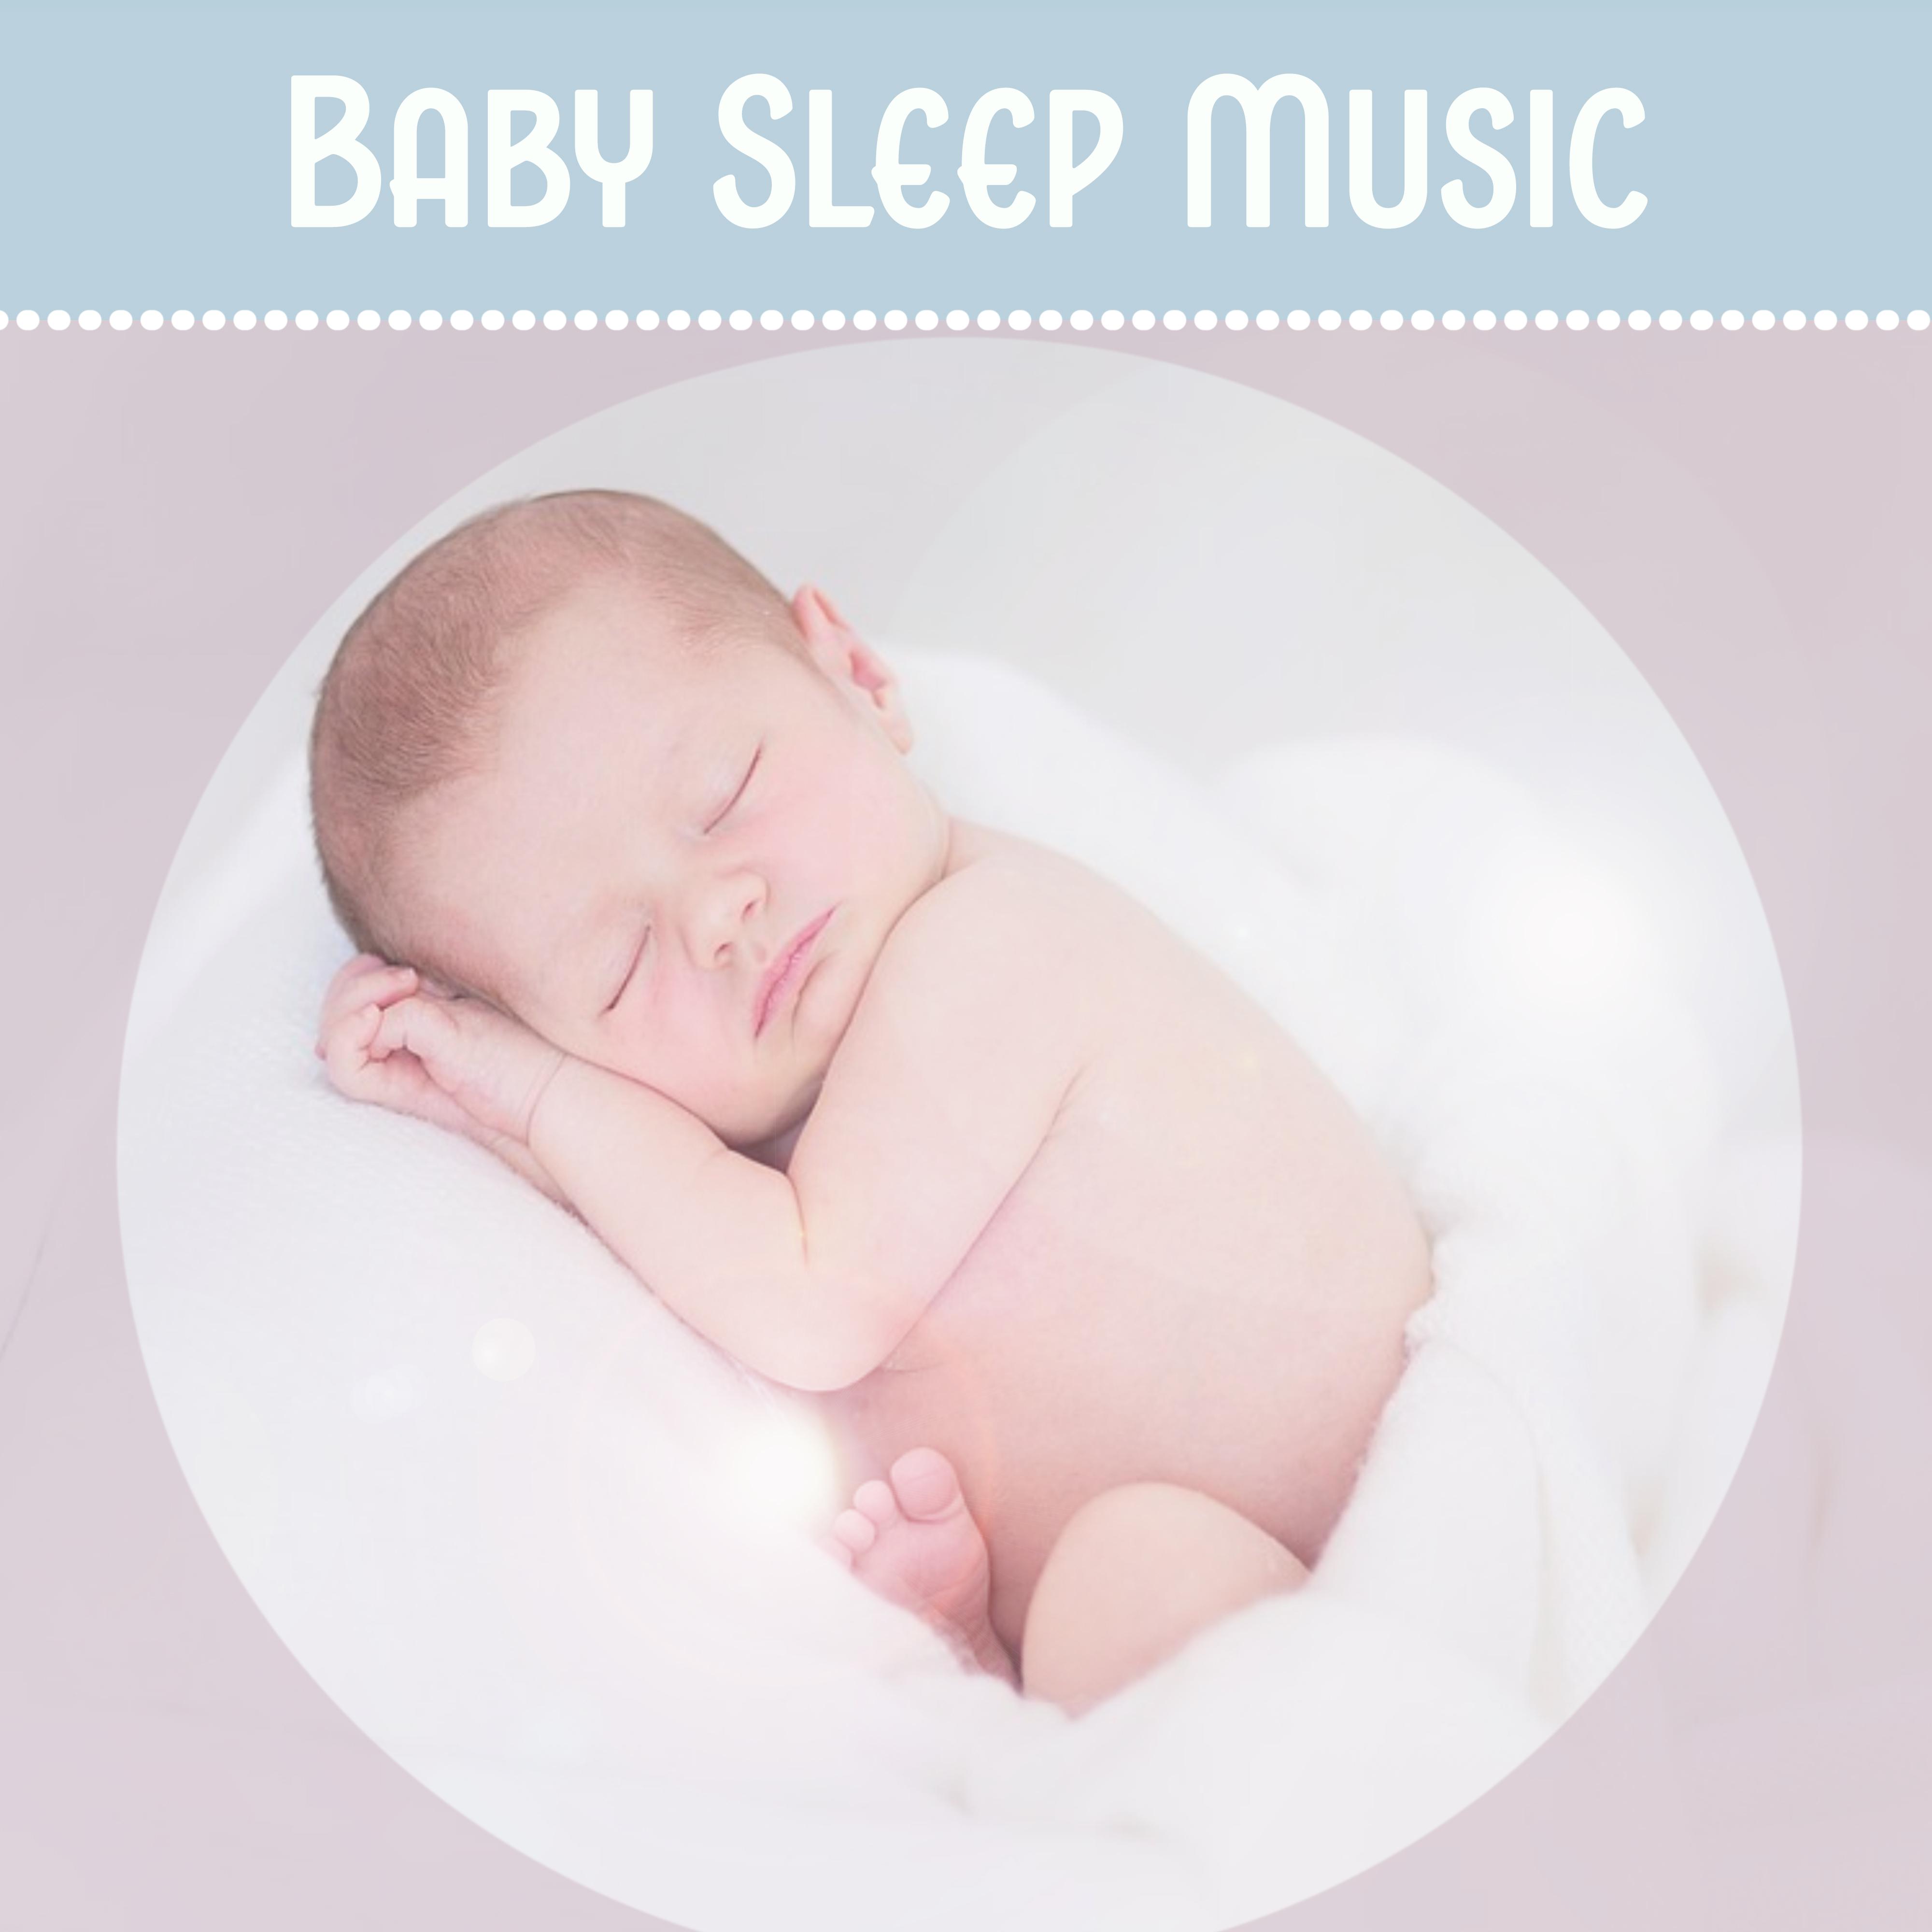 Baby Sleep Music – Soft Sounds of Birds & Ocean Waves for Baby to Easily Fall Asleep, Calm Down and Relax with Relaxing Baby Music to Sleep